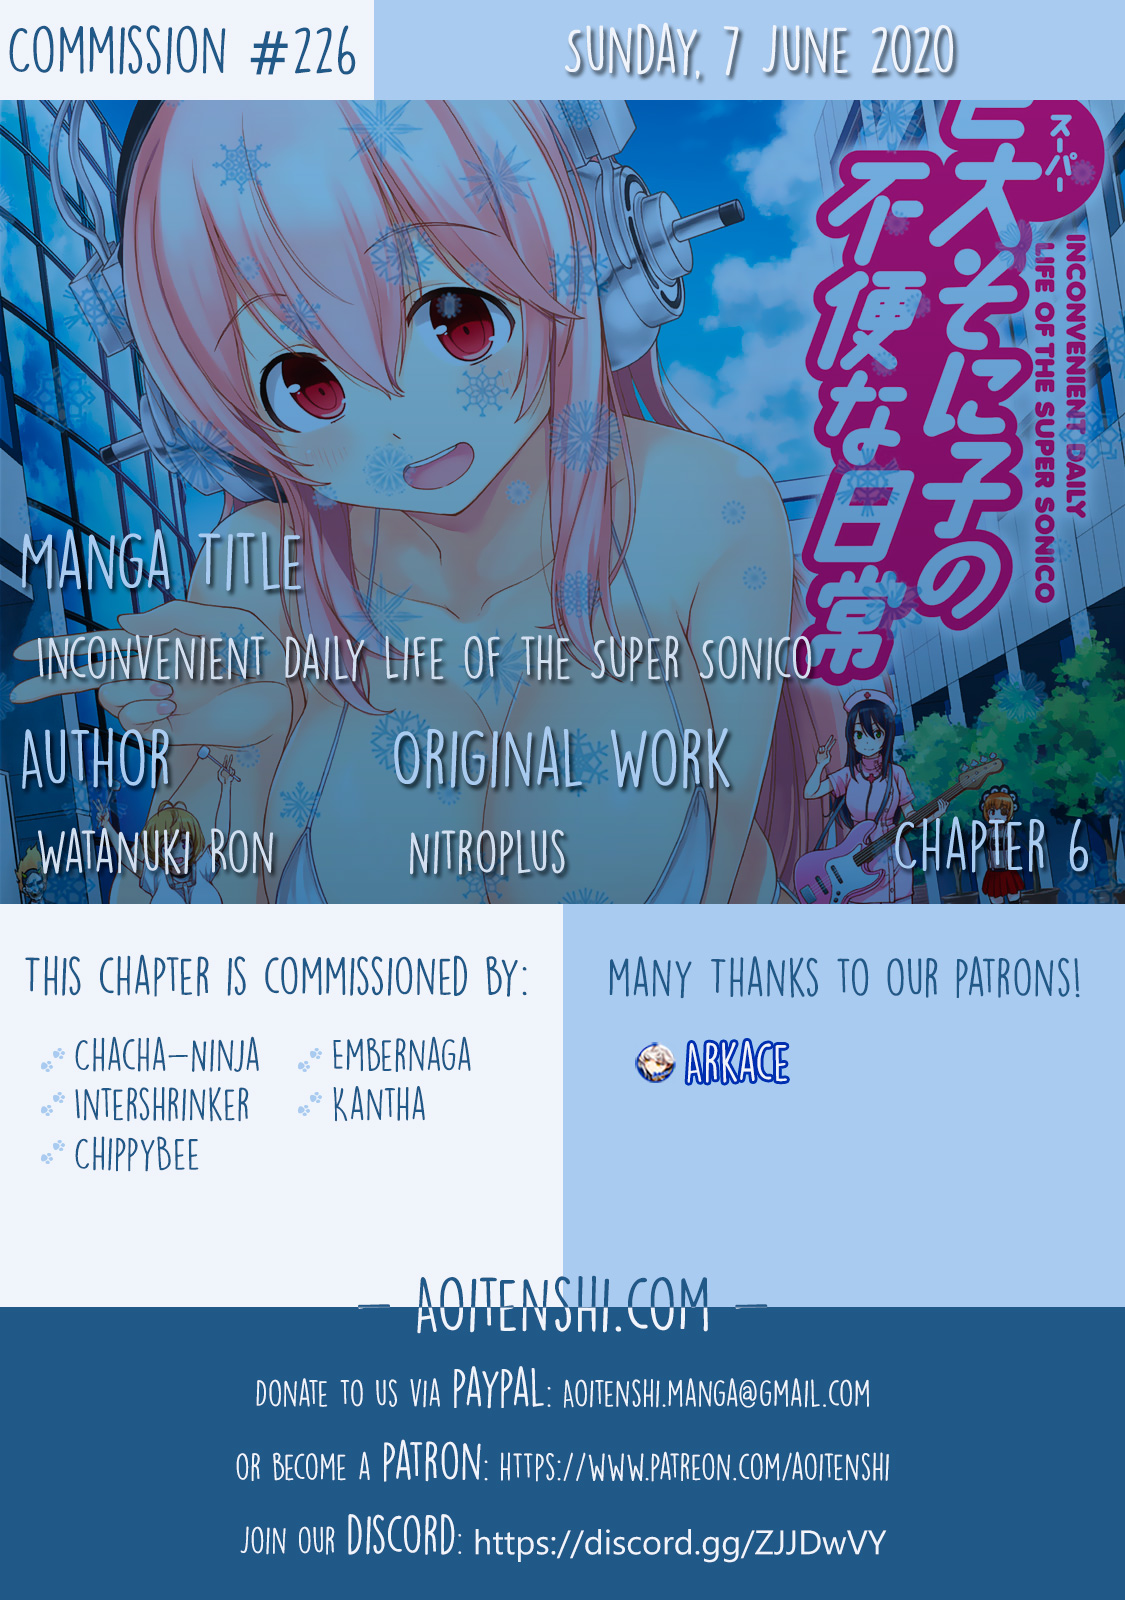 Inconvenient Daily Life of the Super Sonico!!! Vol. 1 Ch. 6 What We Can Do